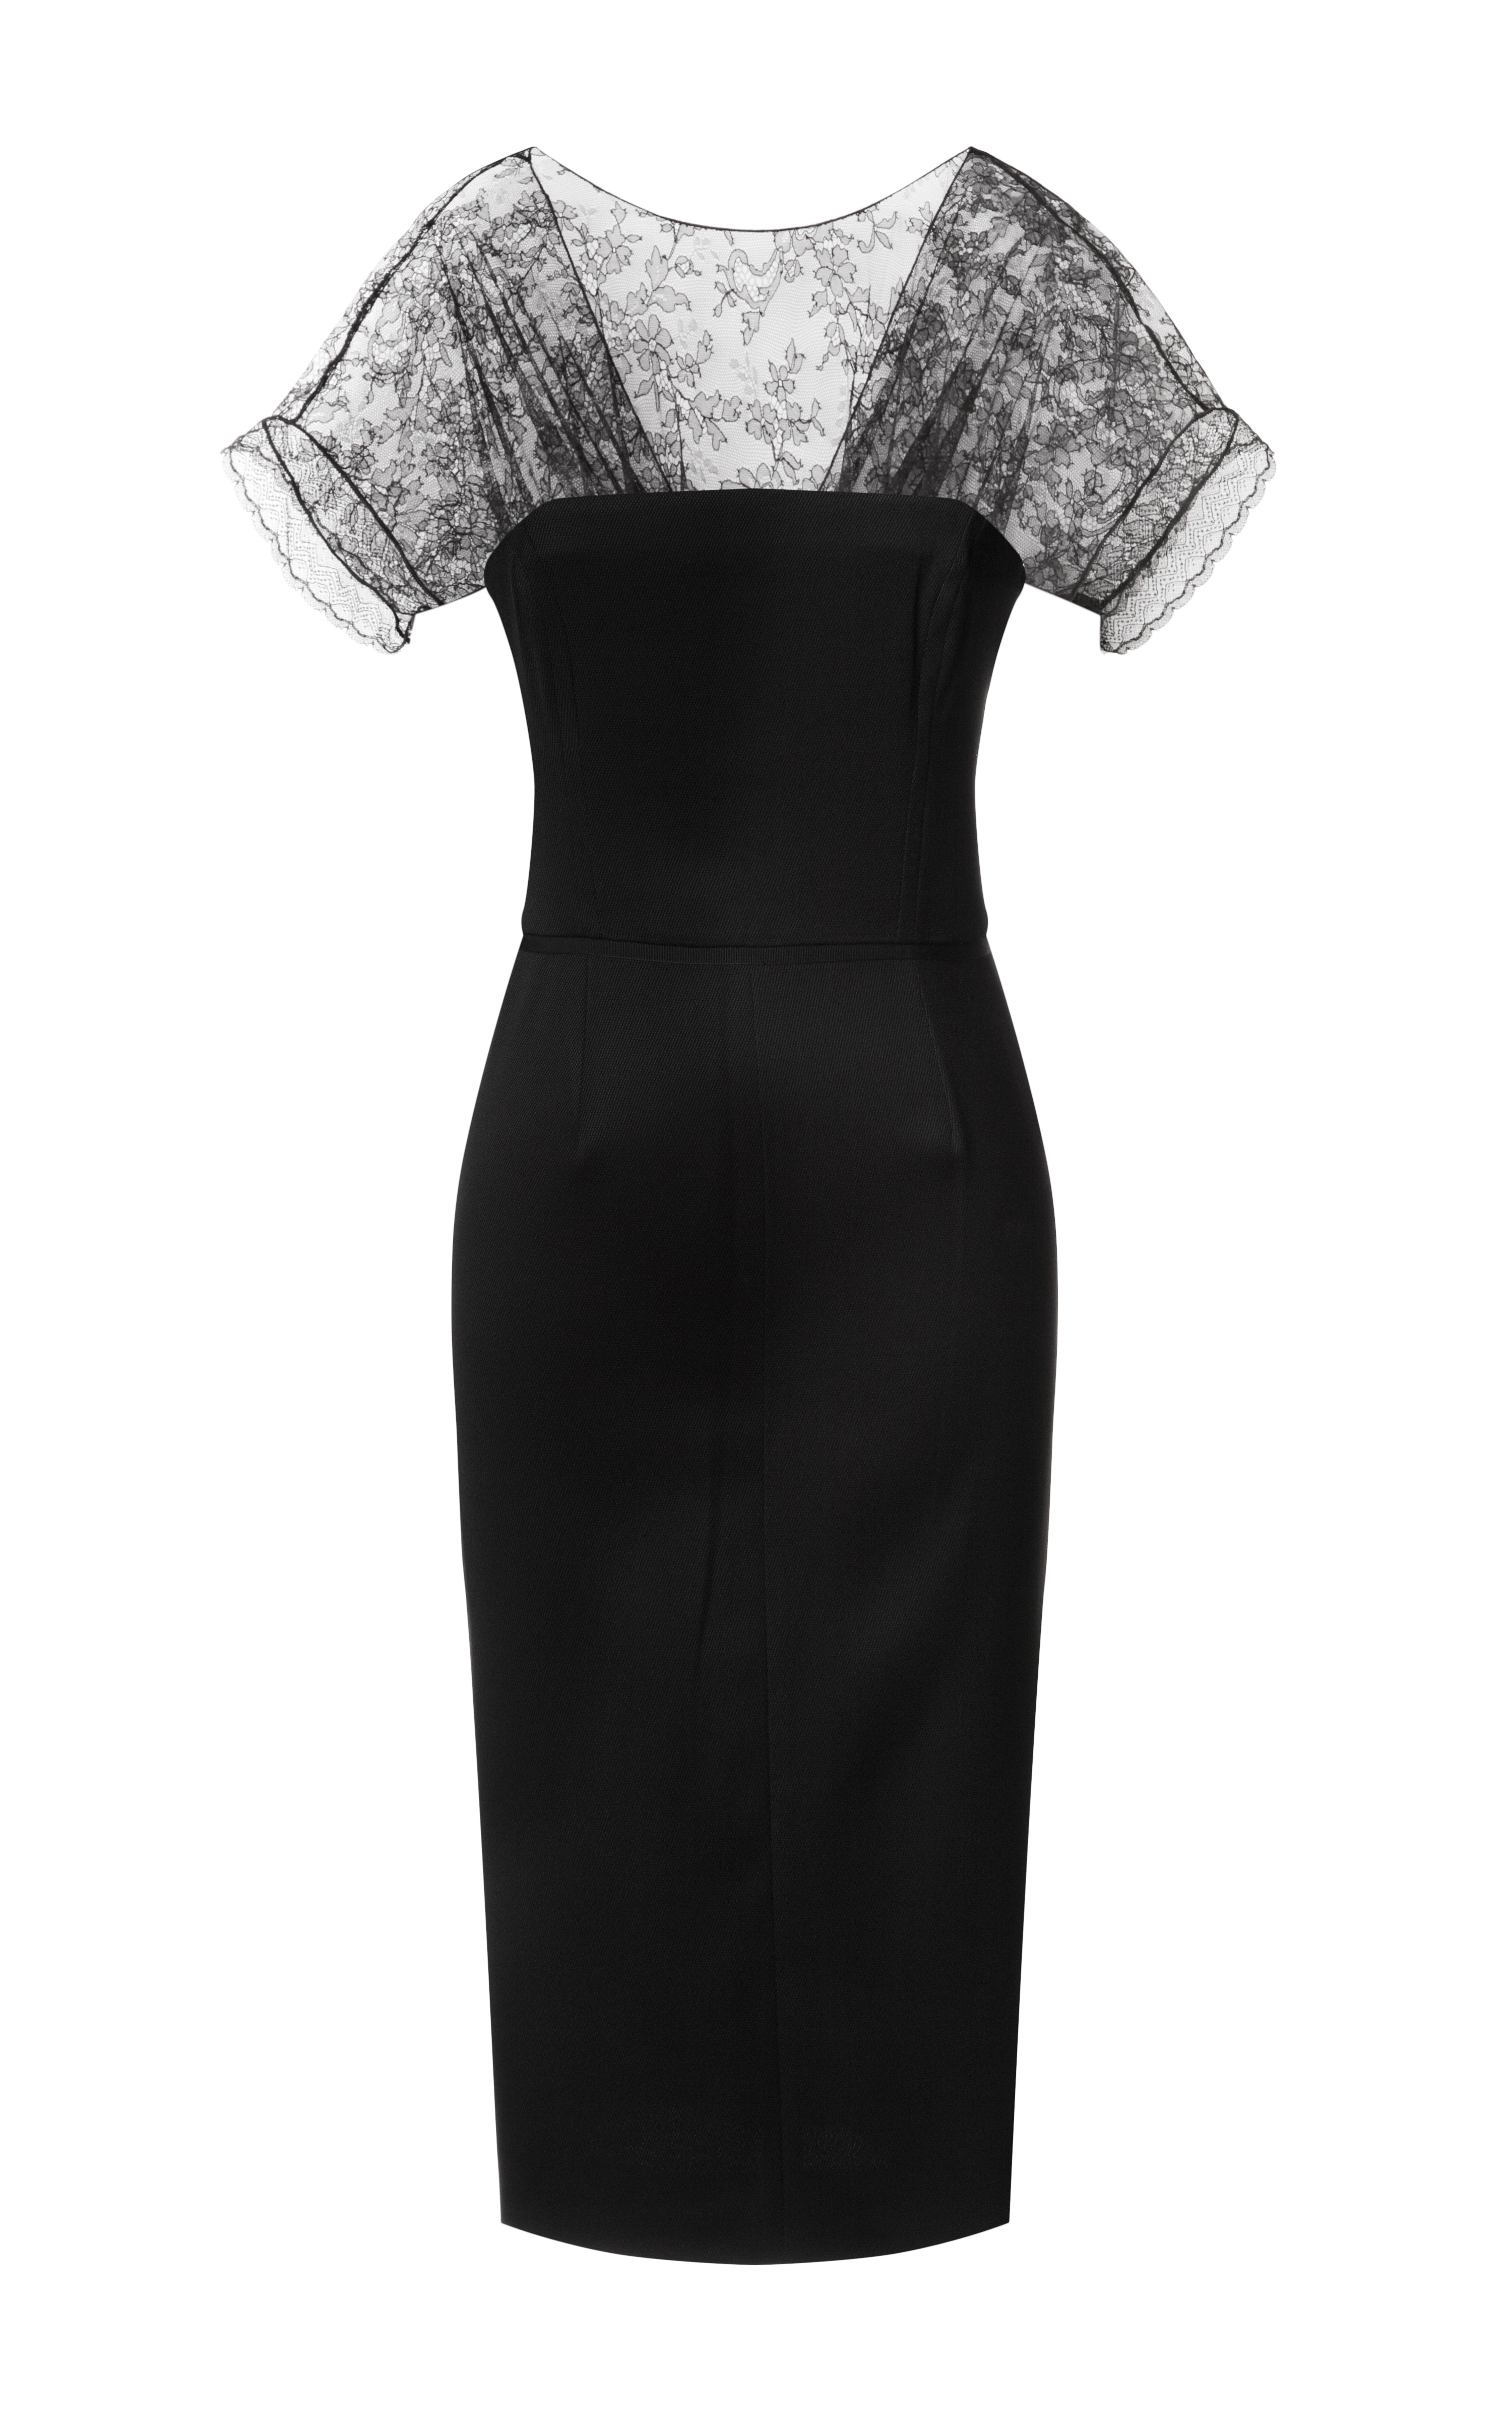 Lyst - Nina Ricci Fitted Pencil Dress with Lace Neckline in Black